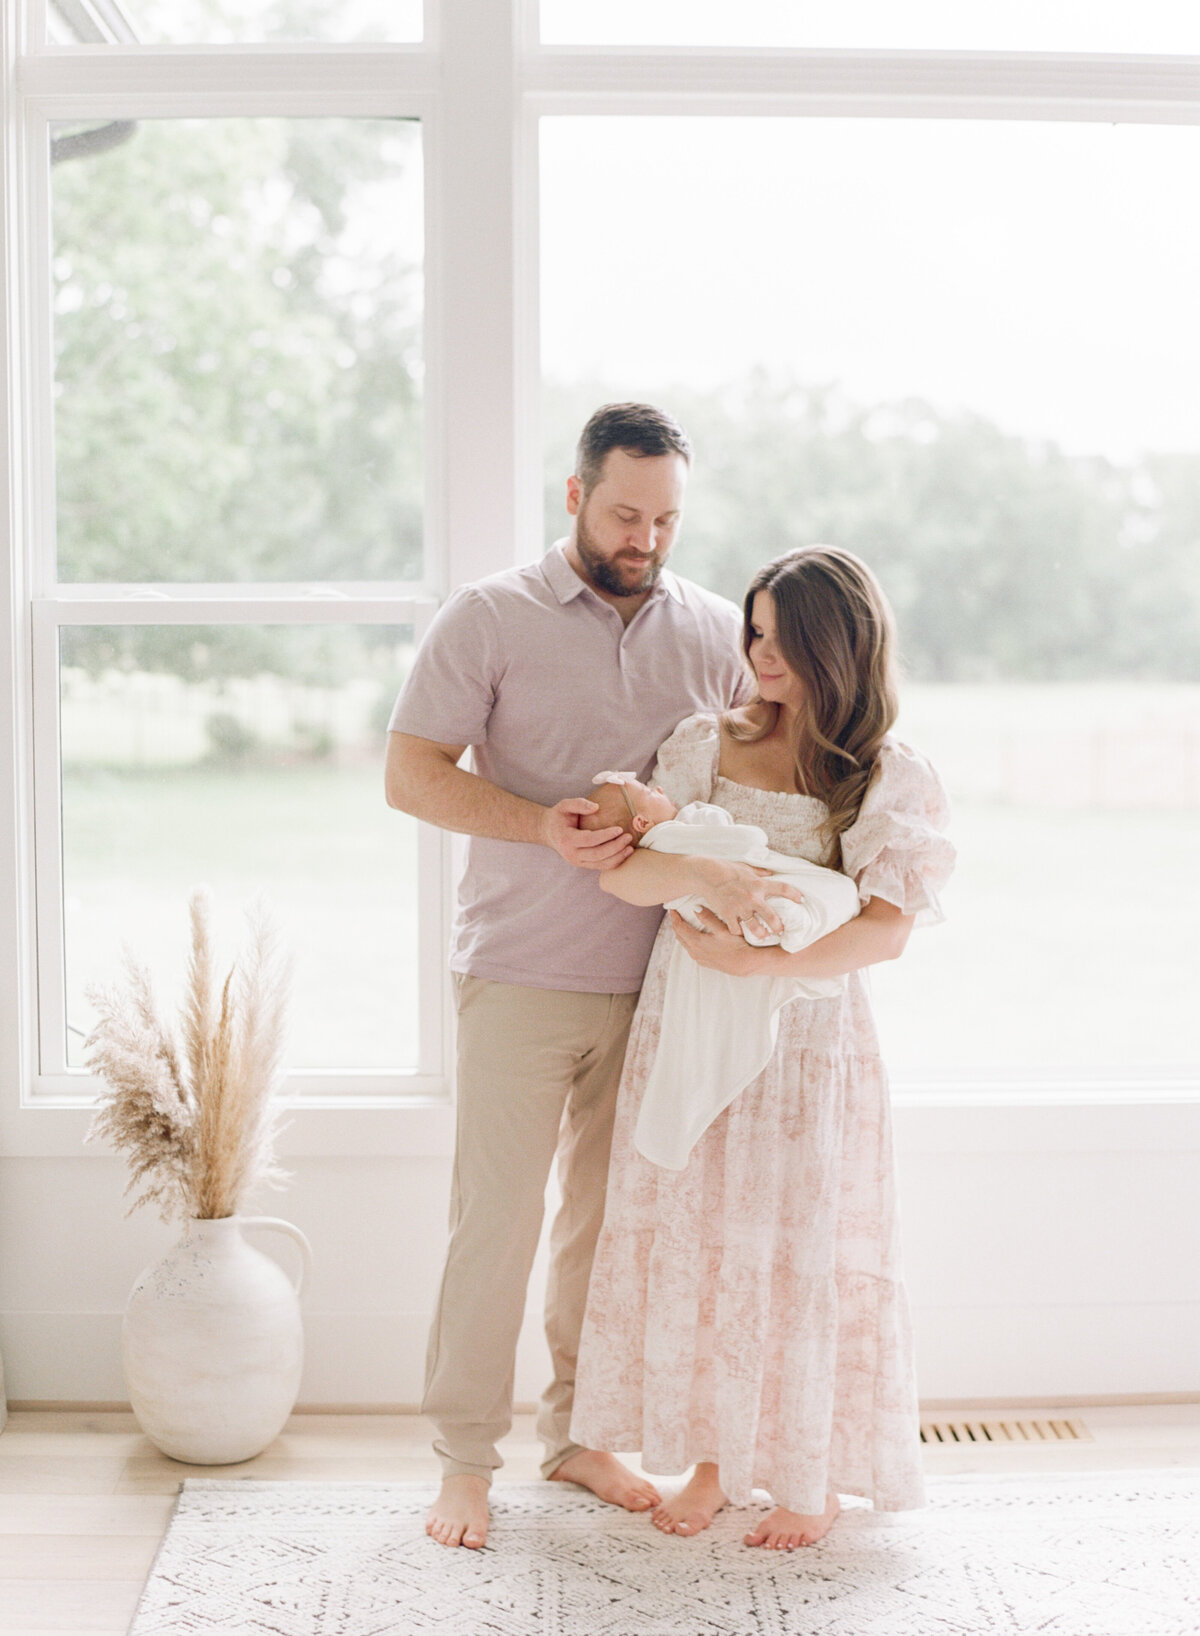 New parents stand and hold their daughter in front of large windows during their newborn session in Raleigh. Photographed by Raleigh Newborn Photographer A.J. Dunlap Photography.